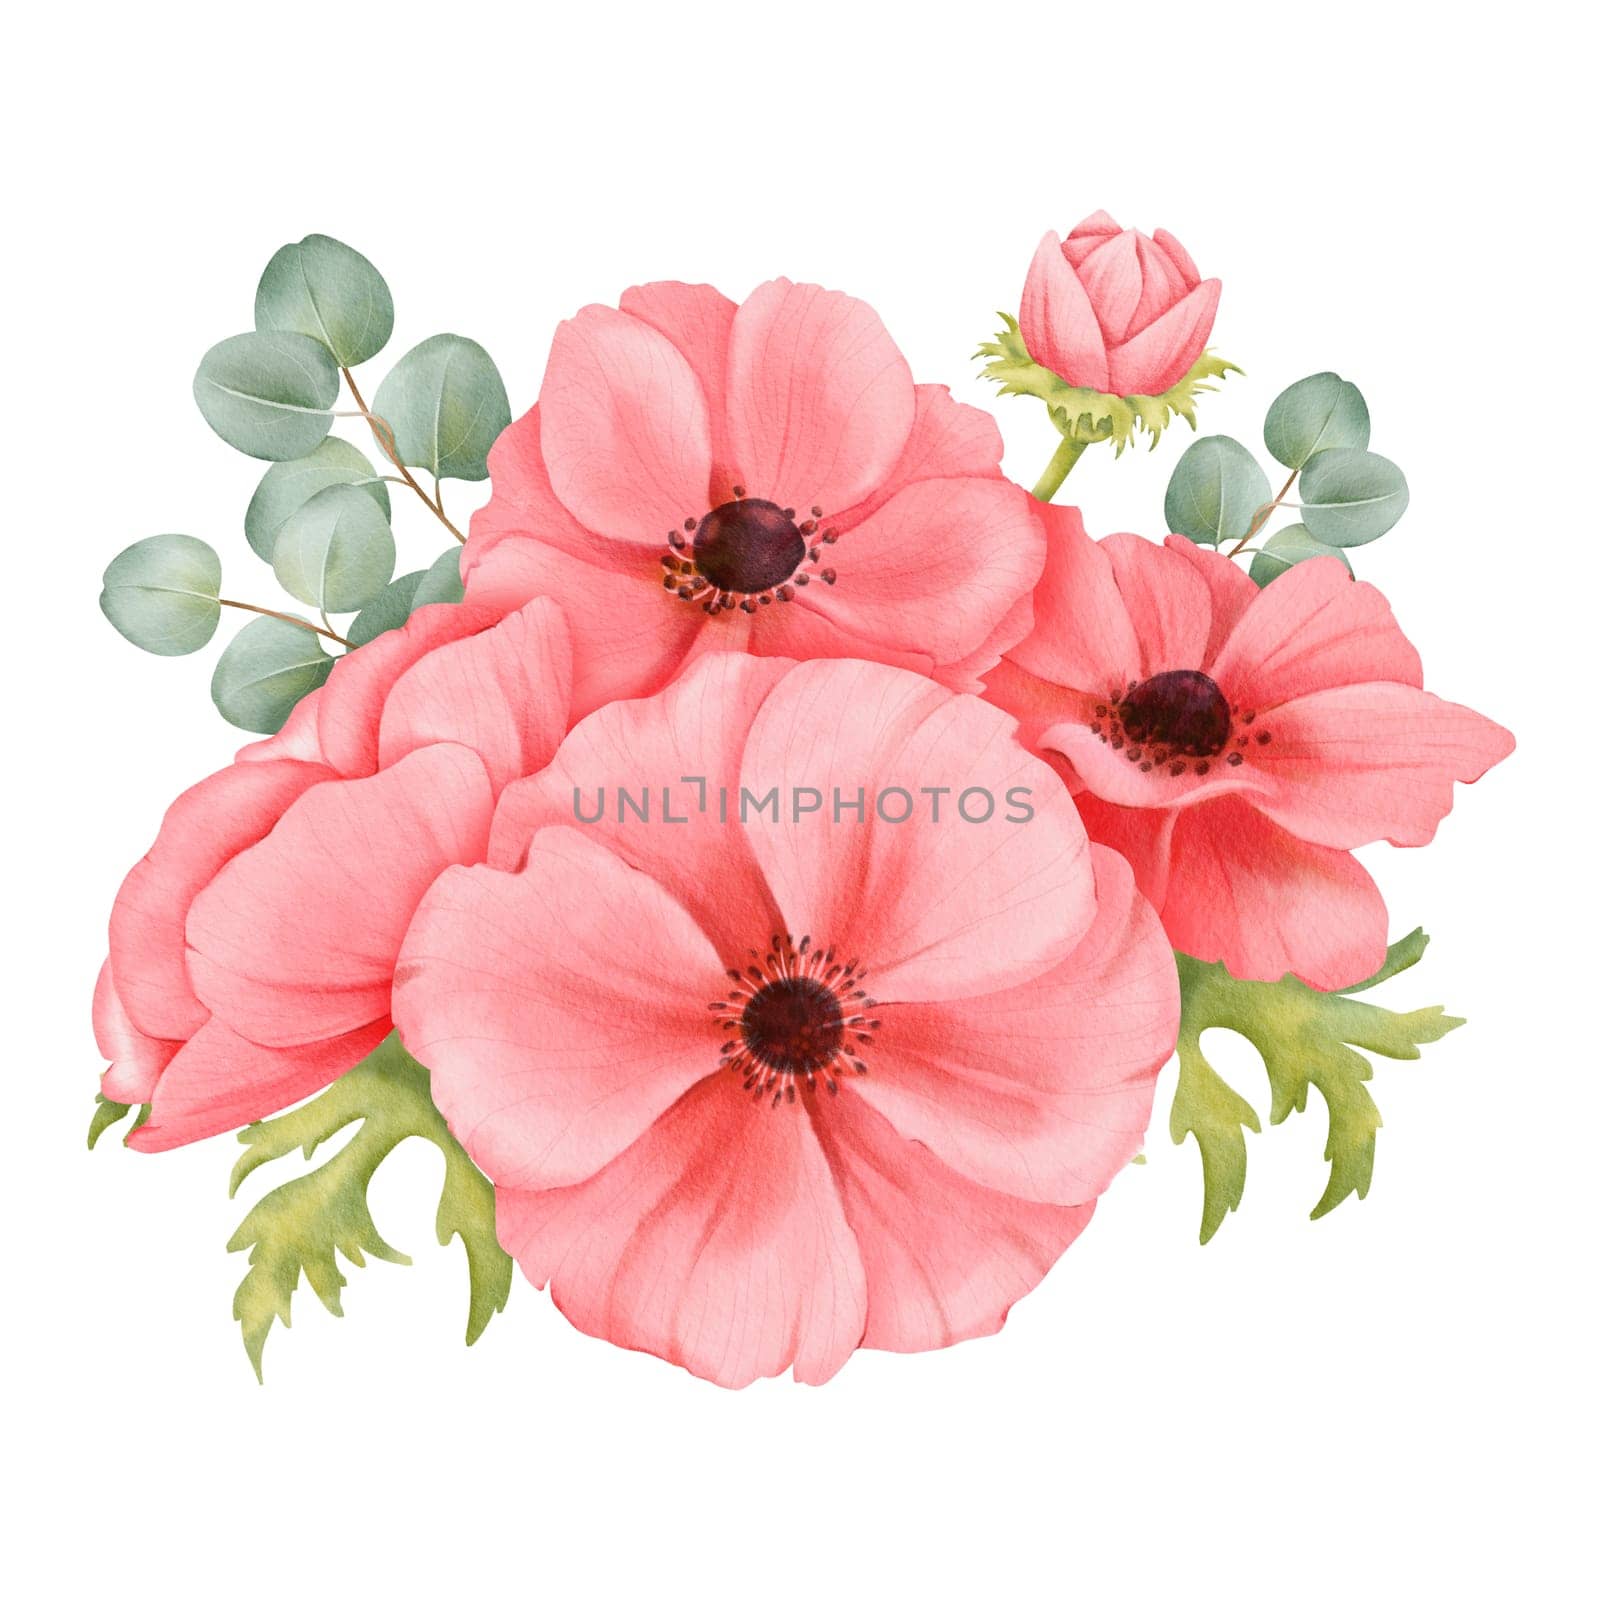 A watercolor composition pink anemone flowers, fresh greenery, and eucalyptus leaves, for wedding invitations, greeting cards, floral-themed branding, art prints, digital wallpapers and home decor.